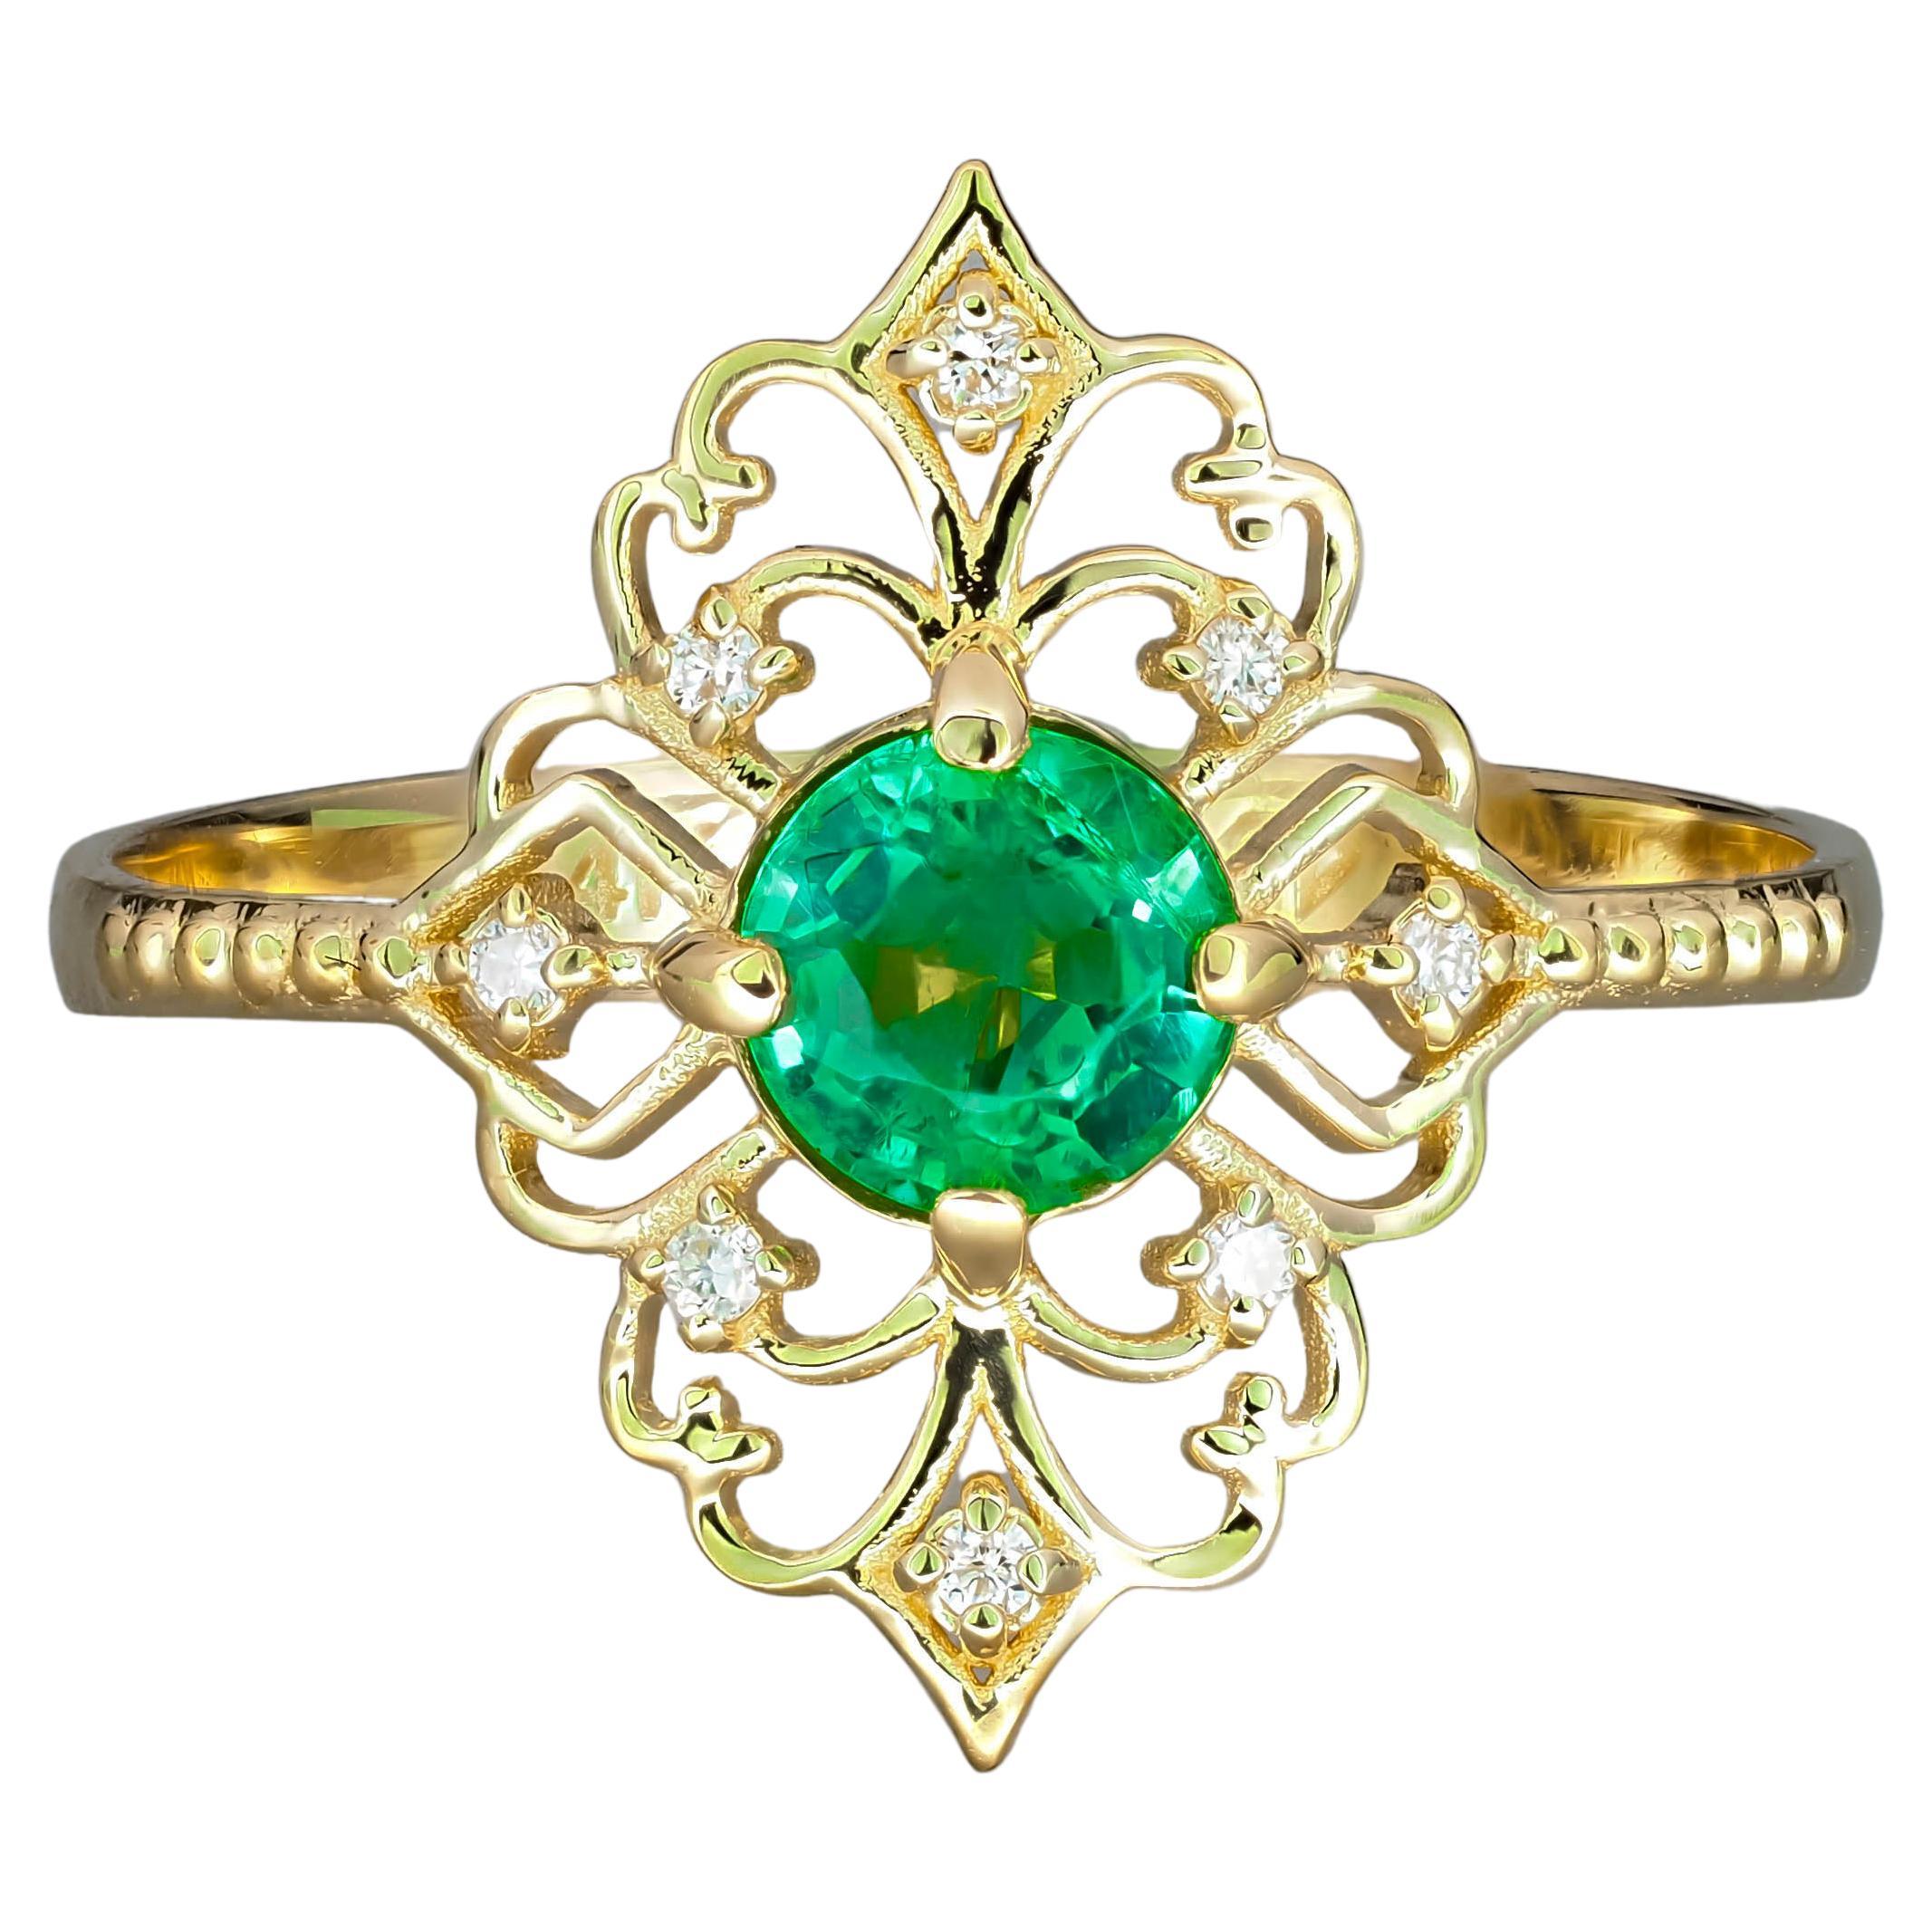 For Sale:  14 K Gold Ring with Emerald and Diamonds 2